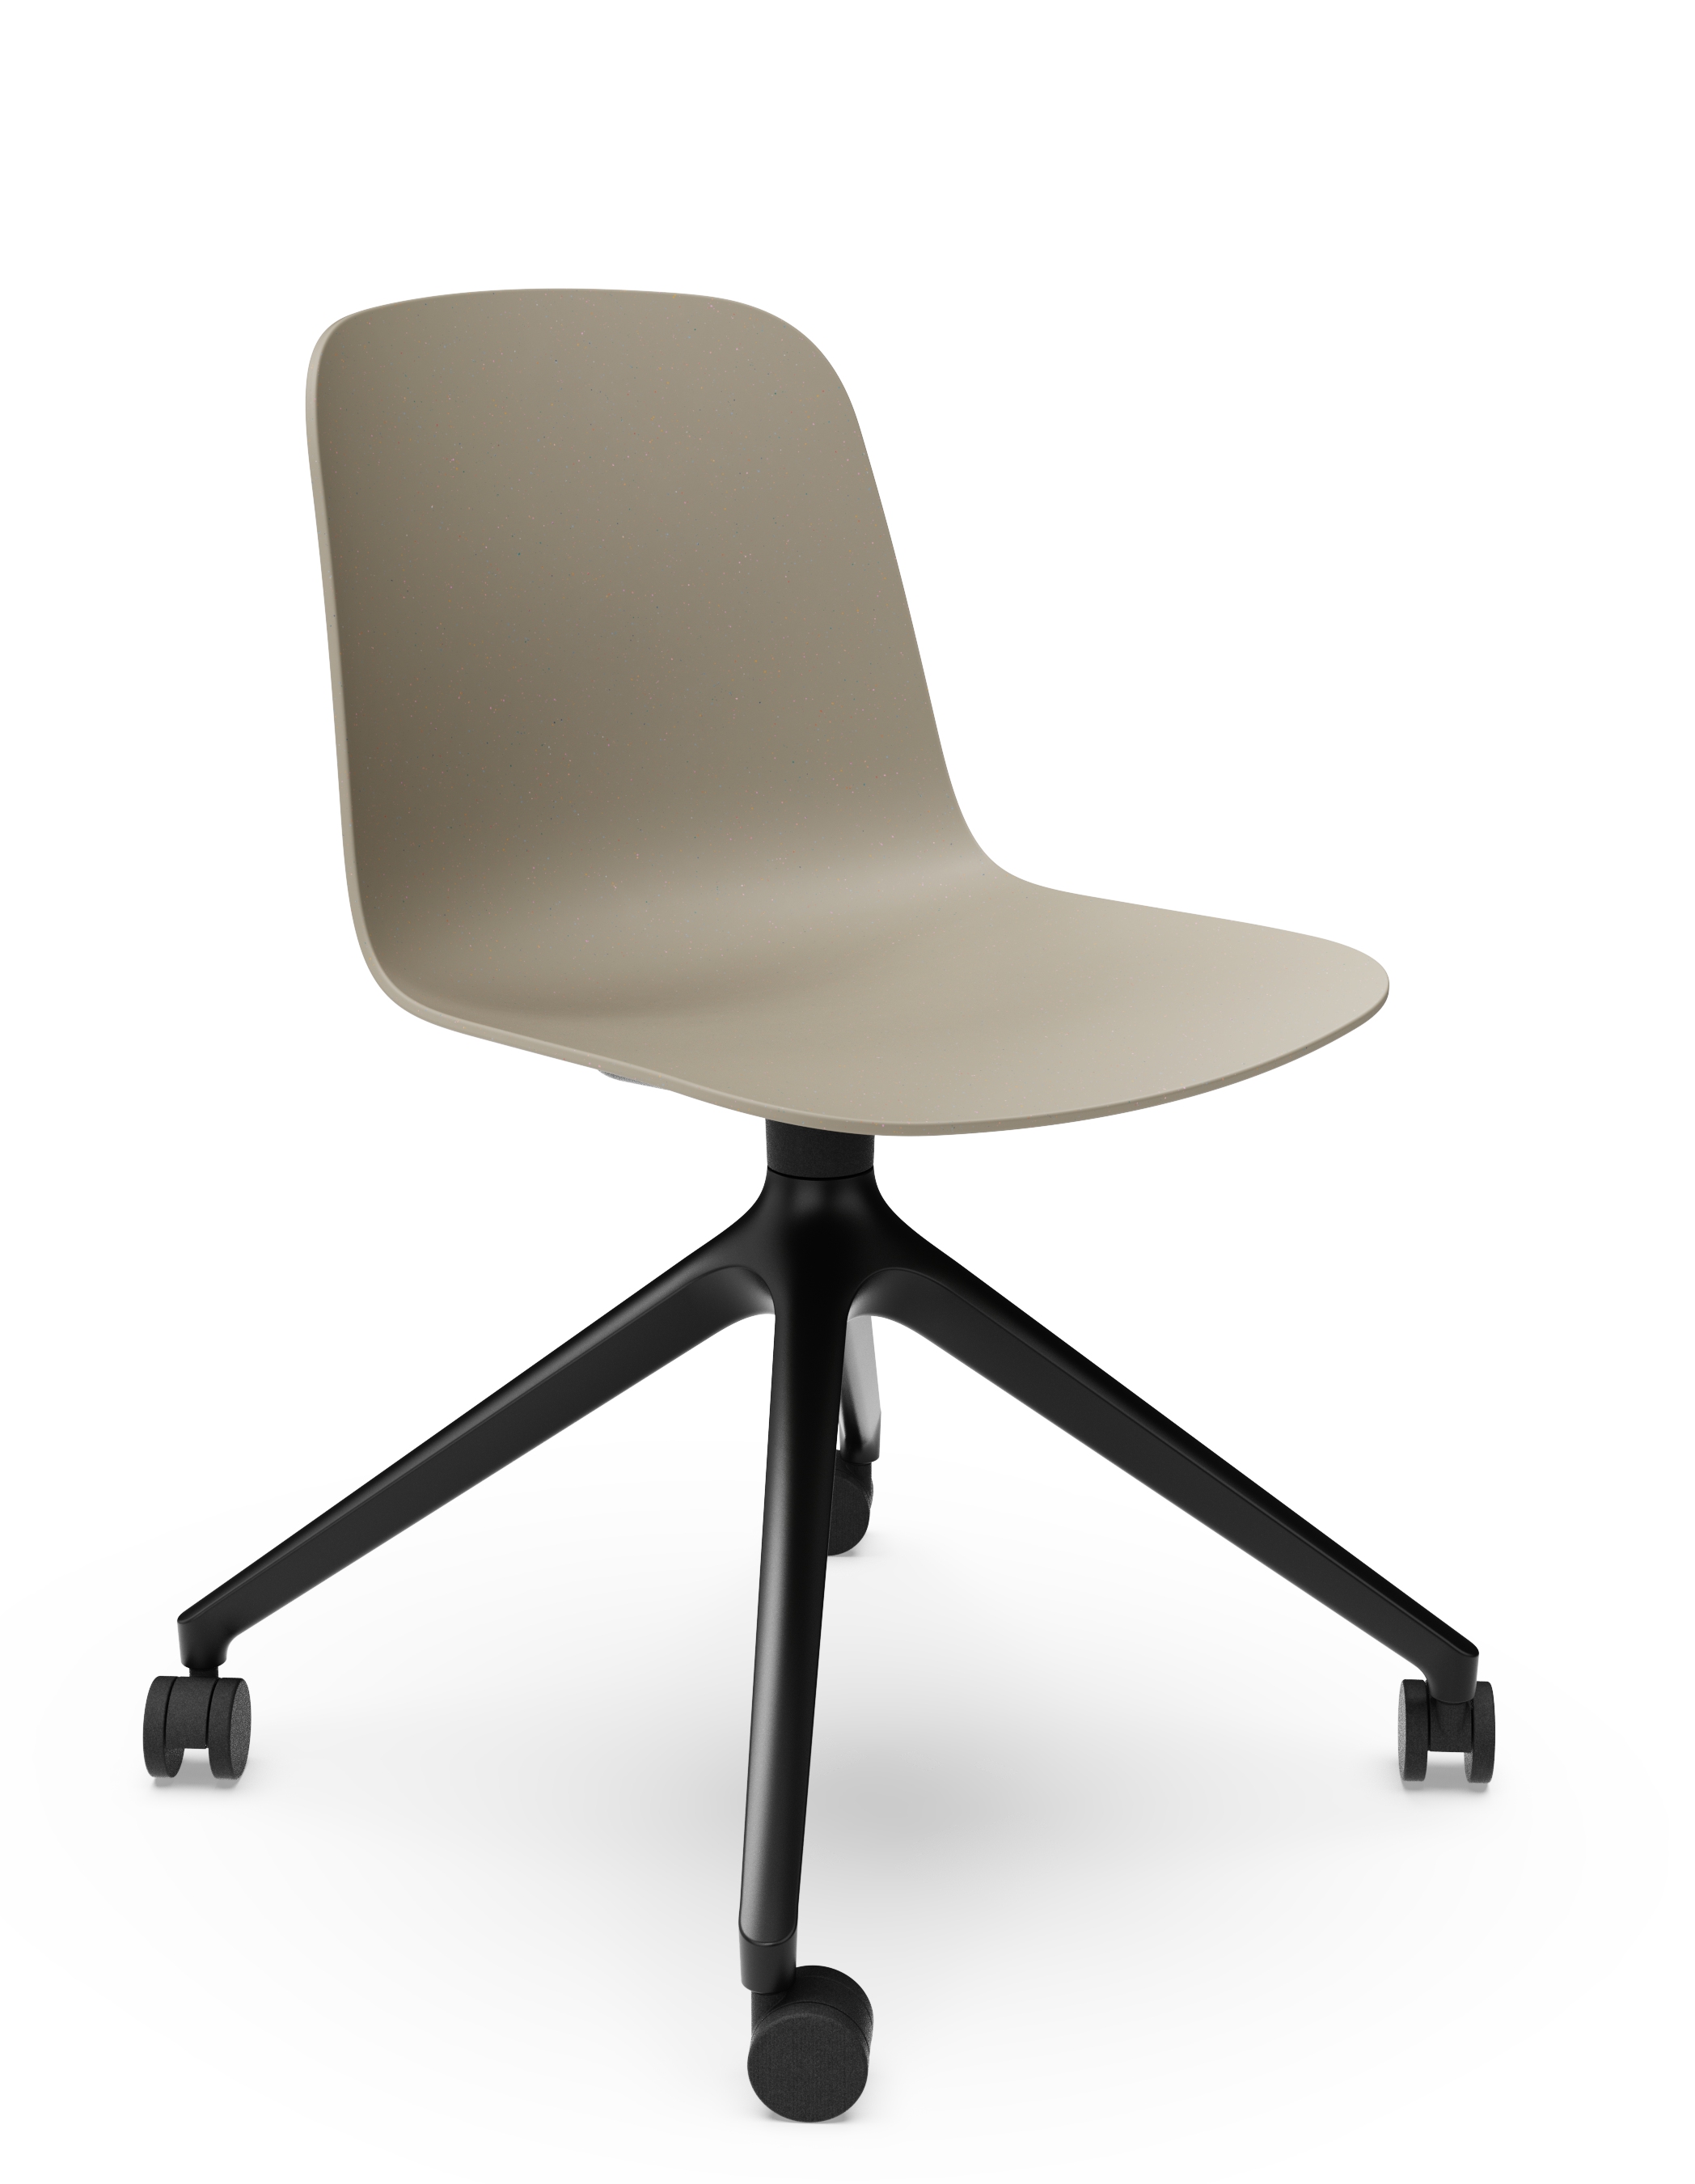 WS - Moto Side Chair- 4 Star Base with Castors - Warm Grey - Front Angle